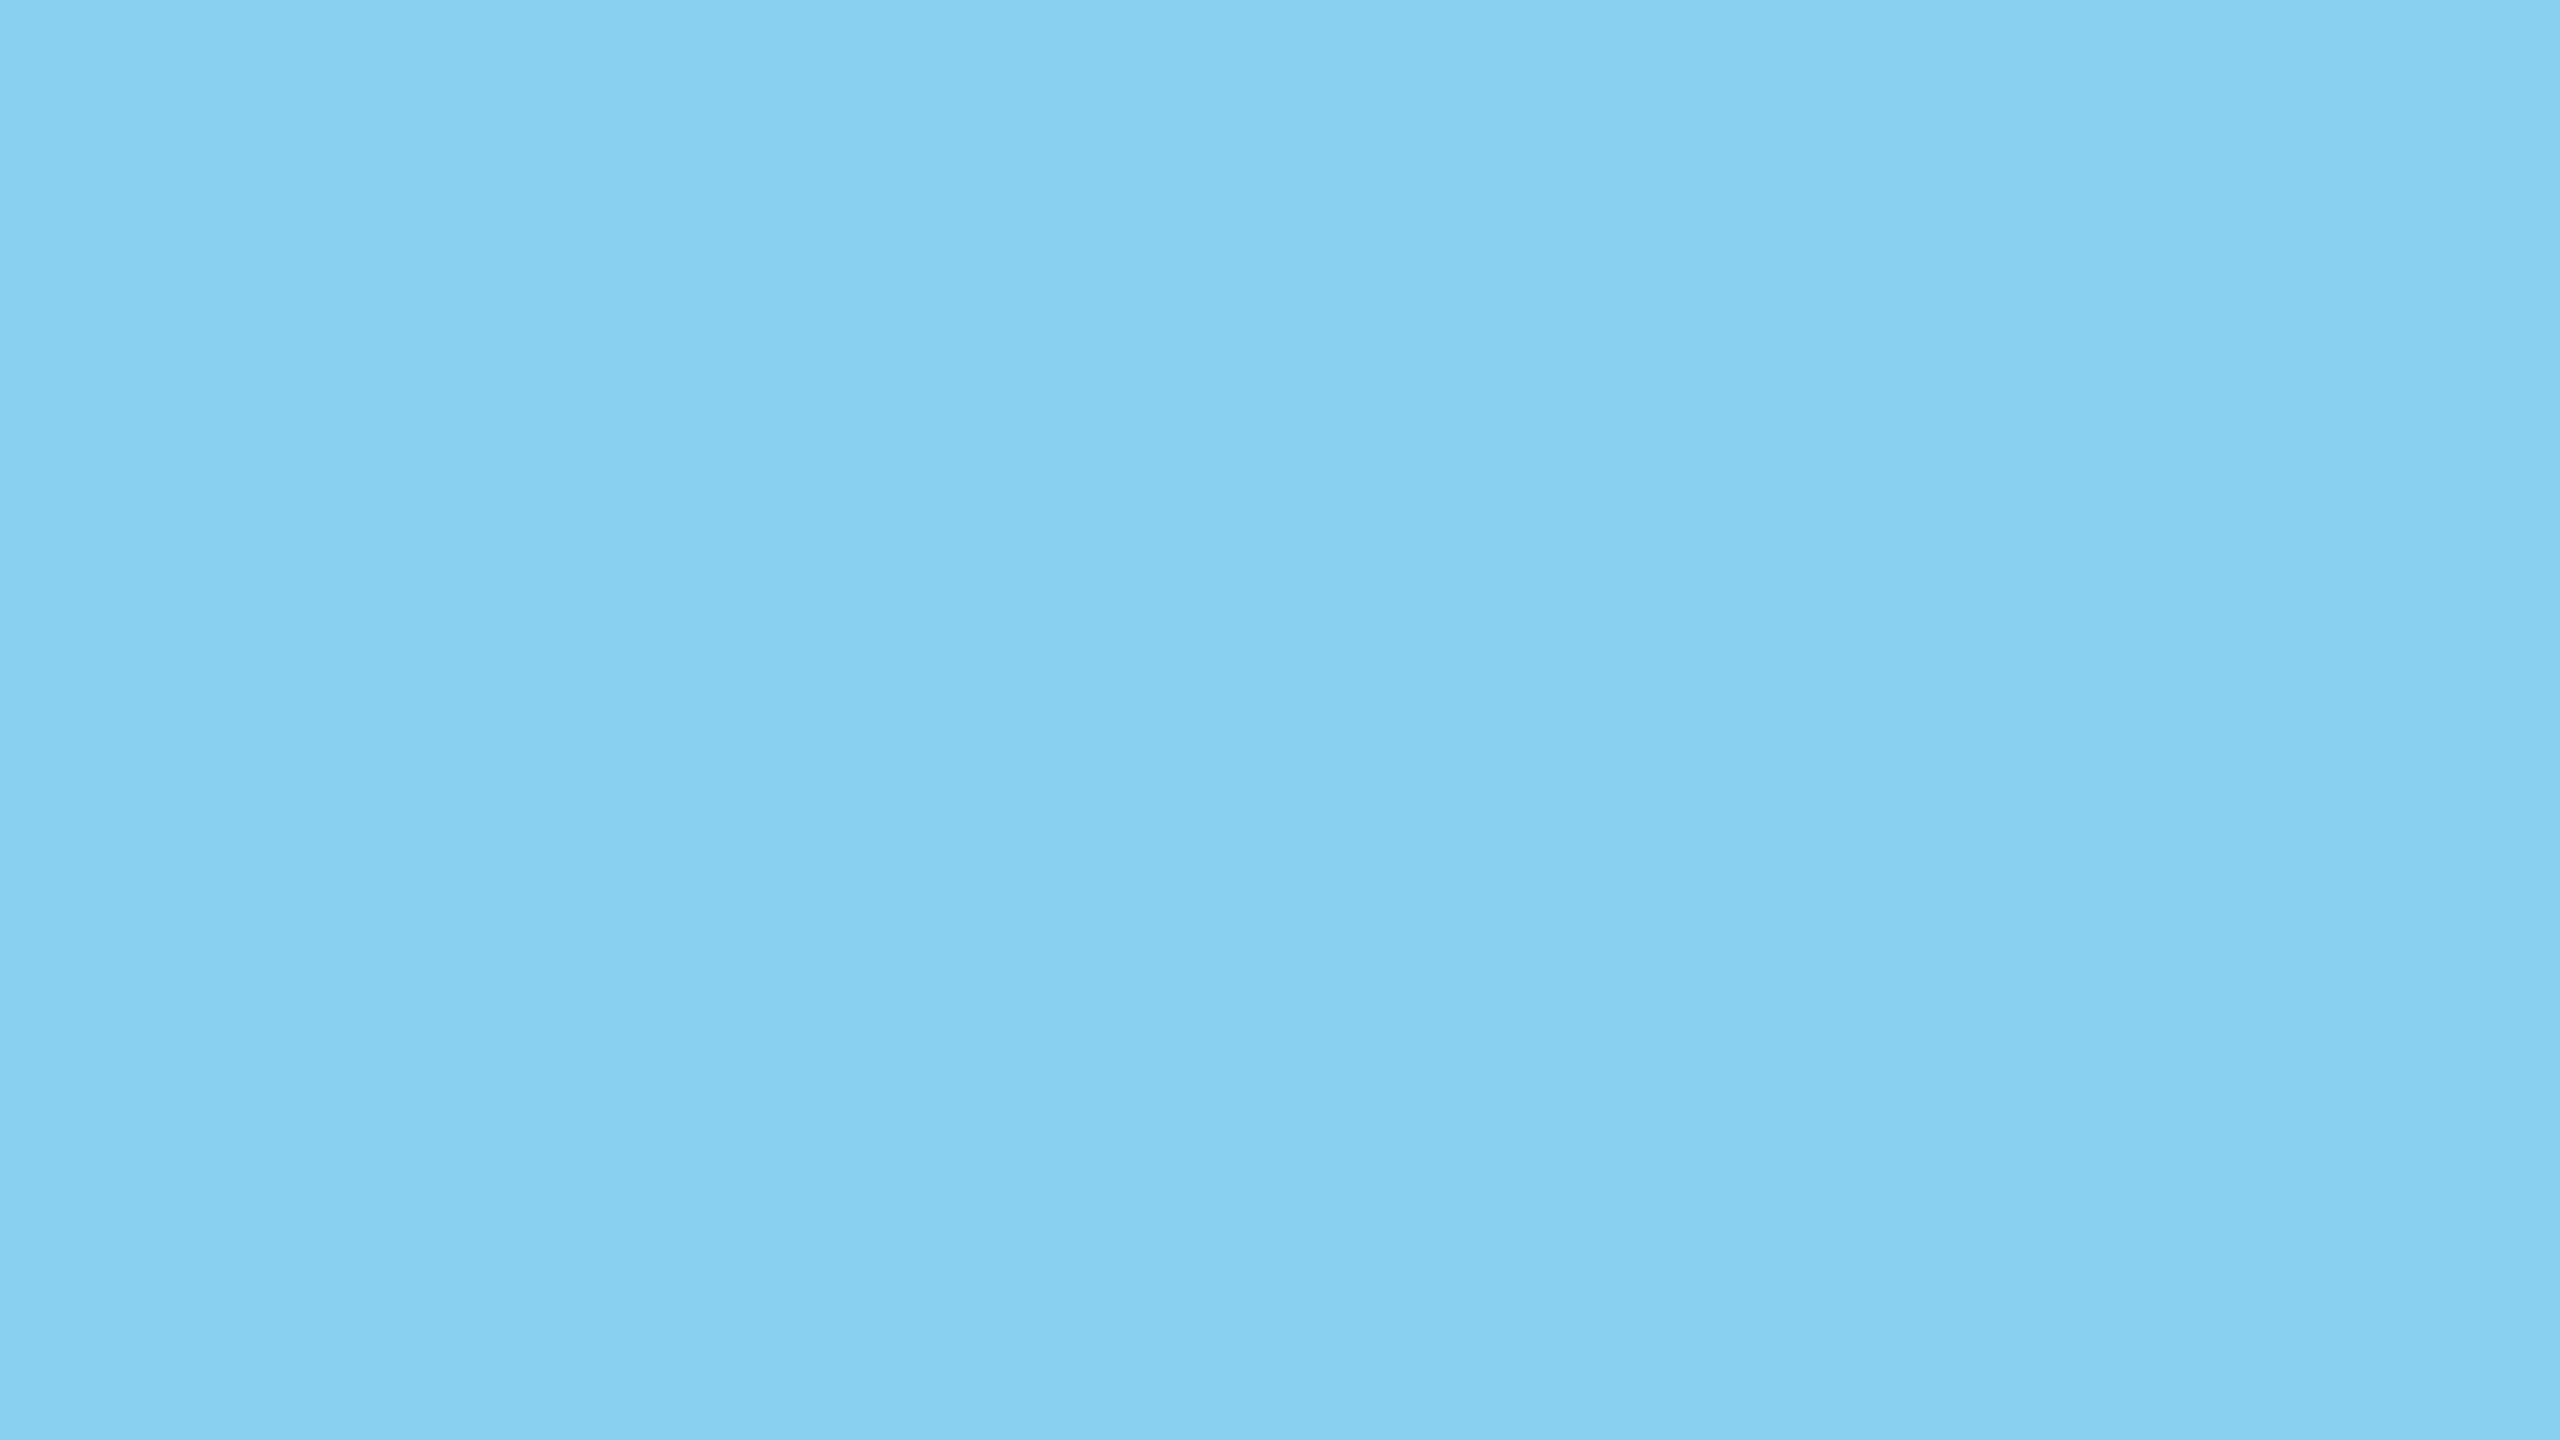 Background Color Solid Baby Blue Background Image